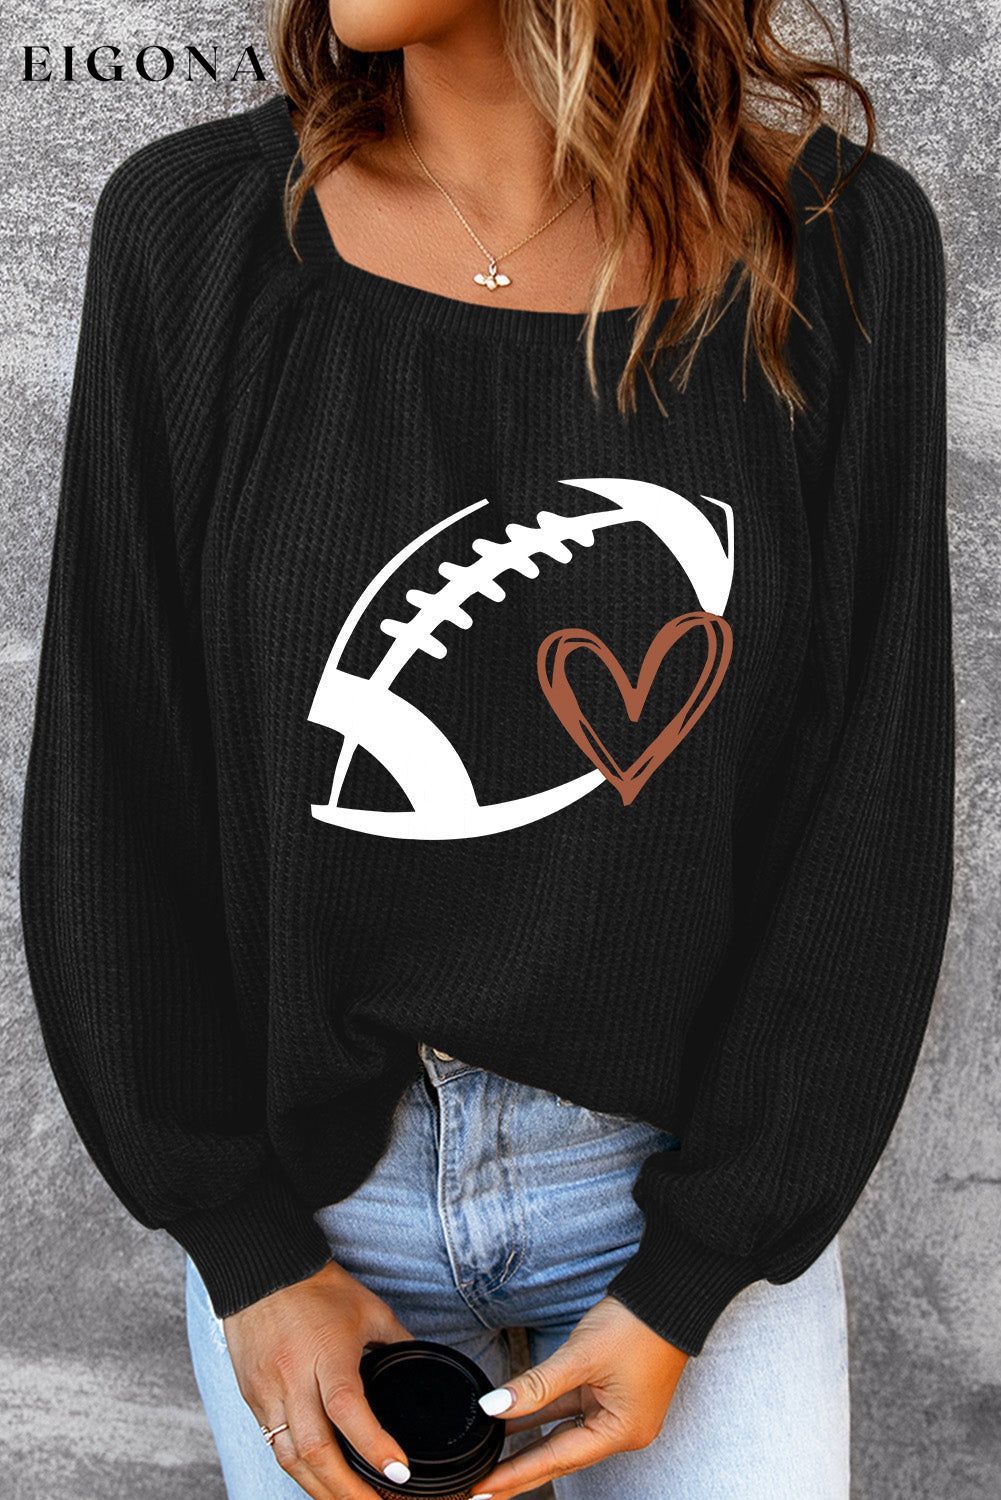 Football Graphic Ribbed Top clothes long sleeve shirt Ship From Overseas shirt sweatshirt SYNZ top trend